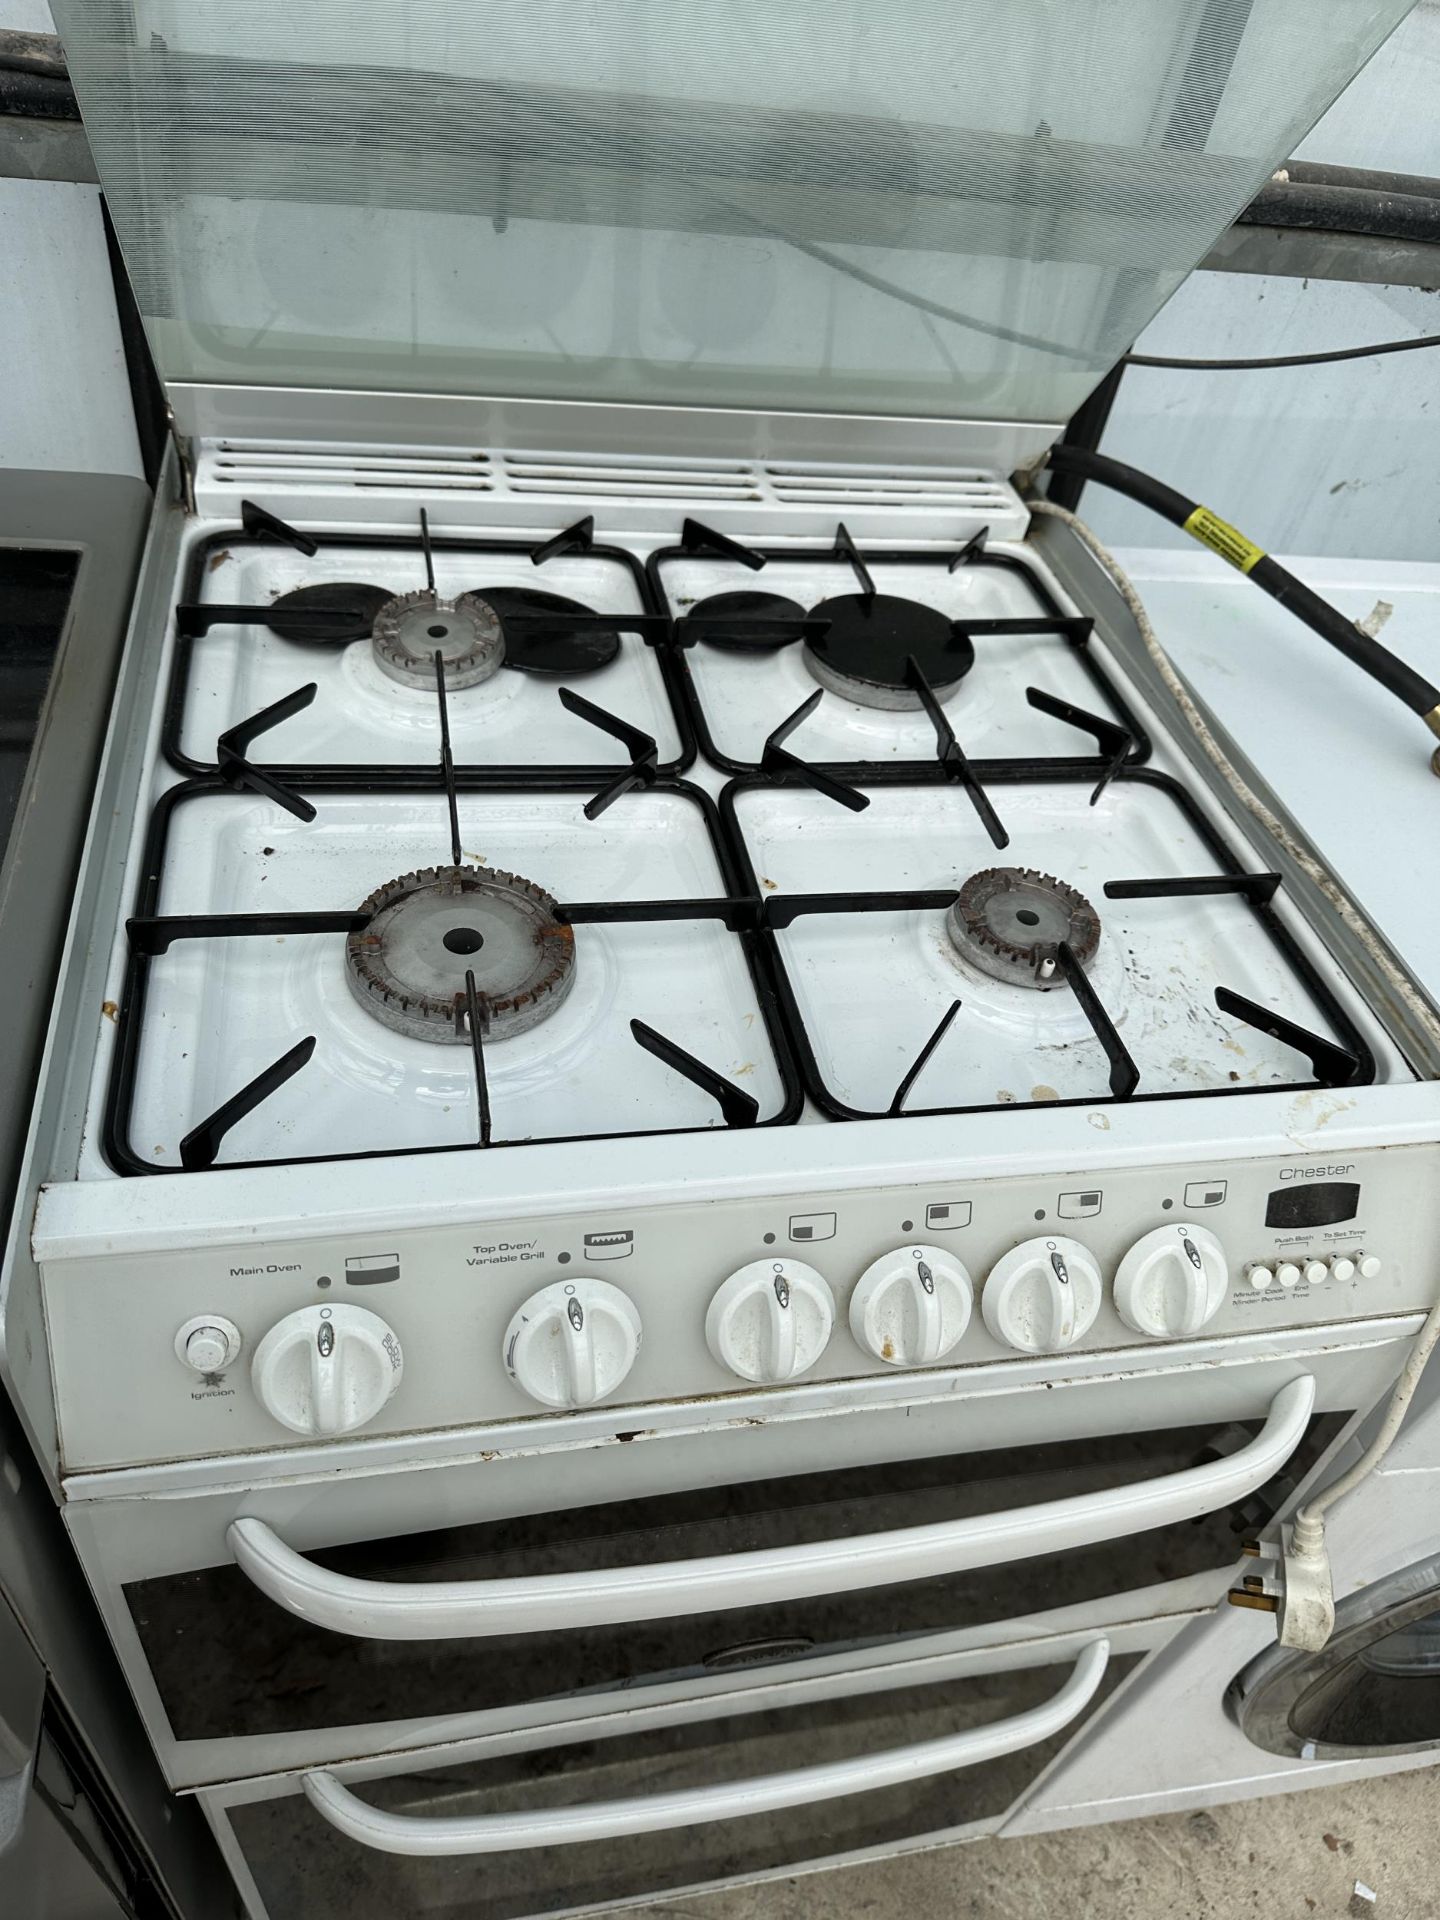 A WHITE CANNON GAS OVEN AND HOB - Image 2 of 4